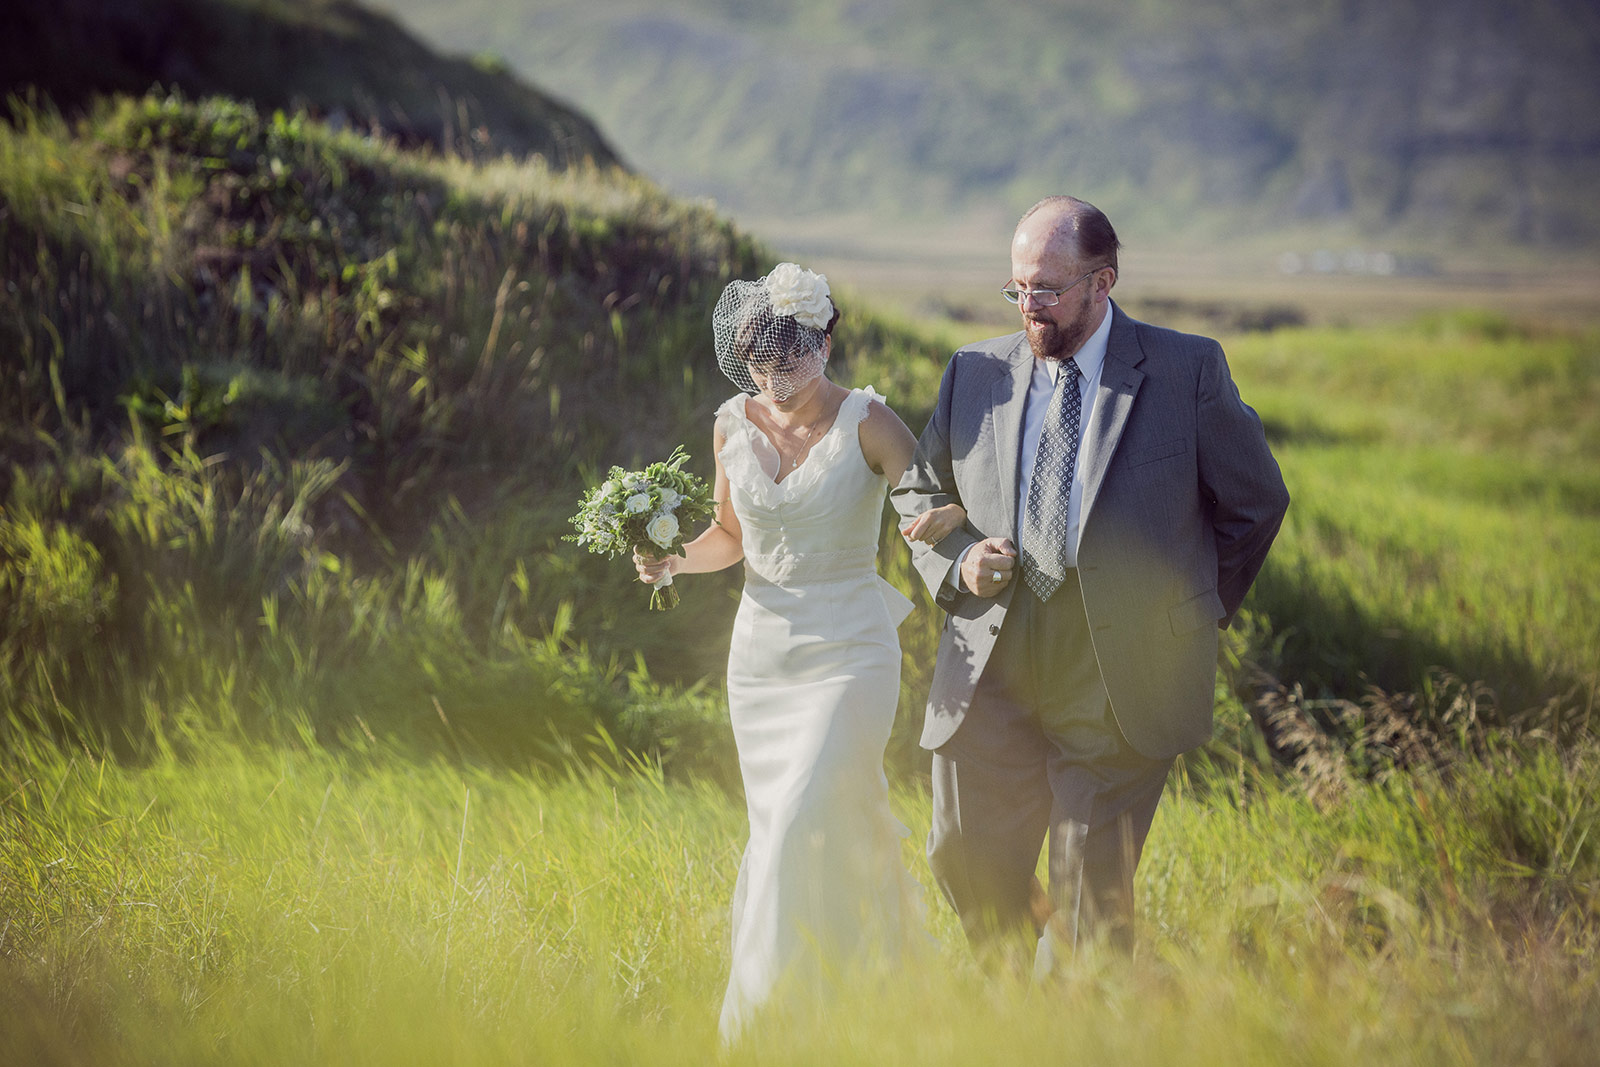 A bride and groom walking through the grass.